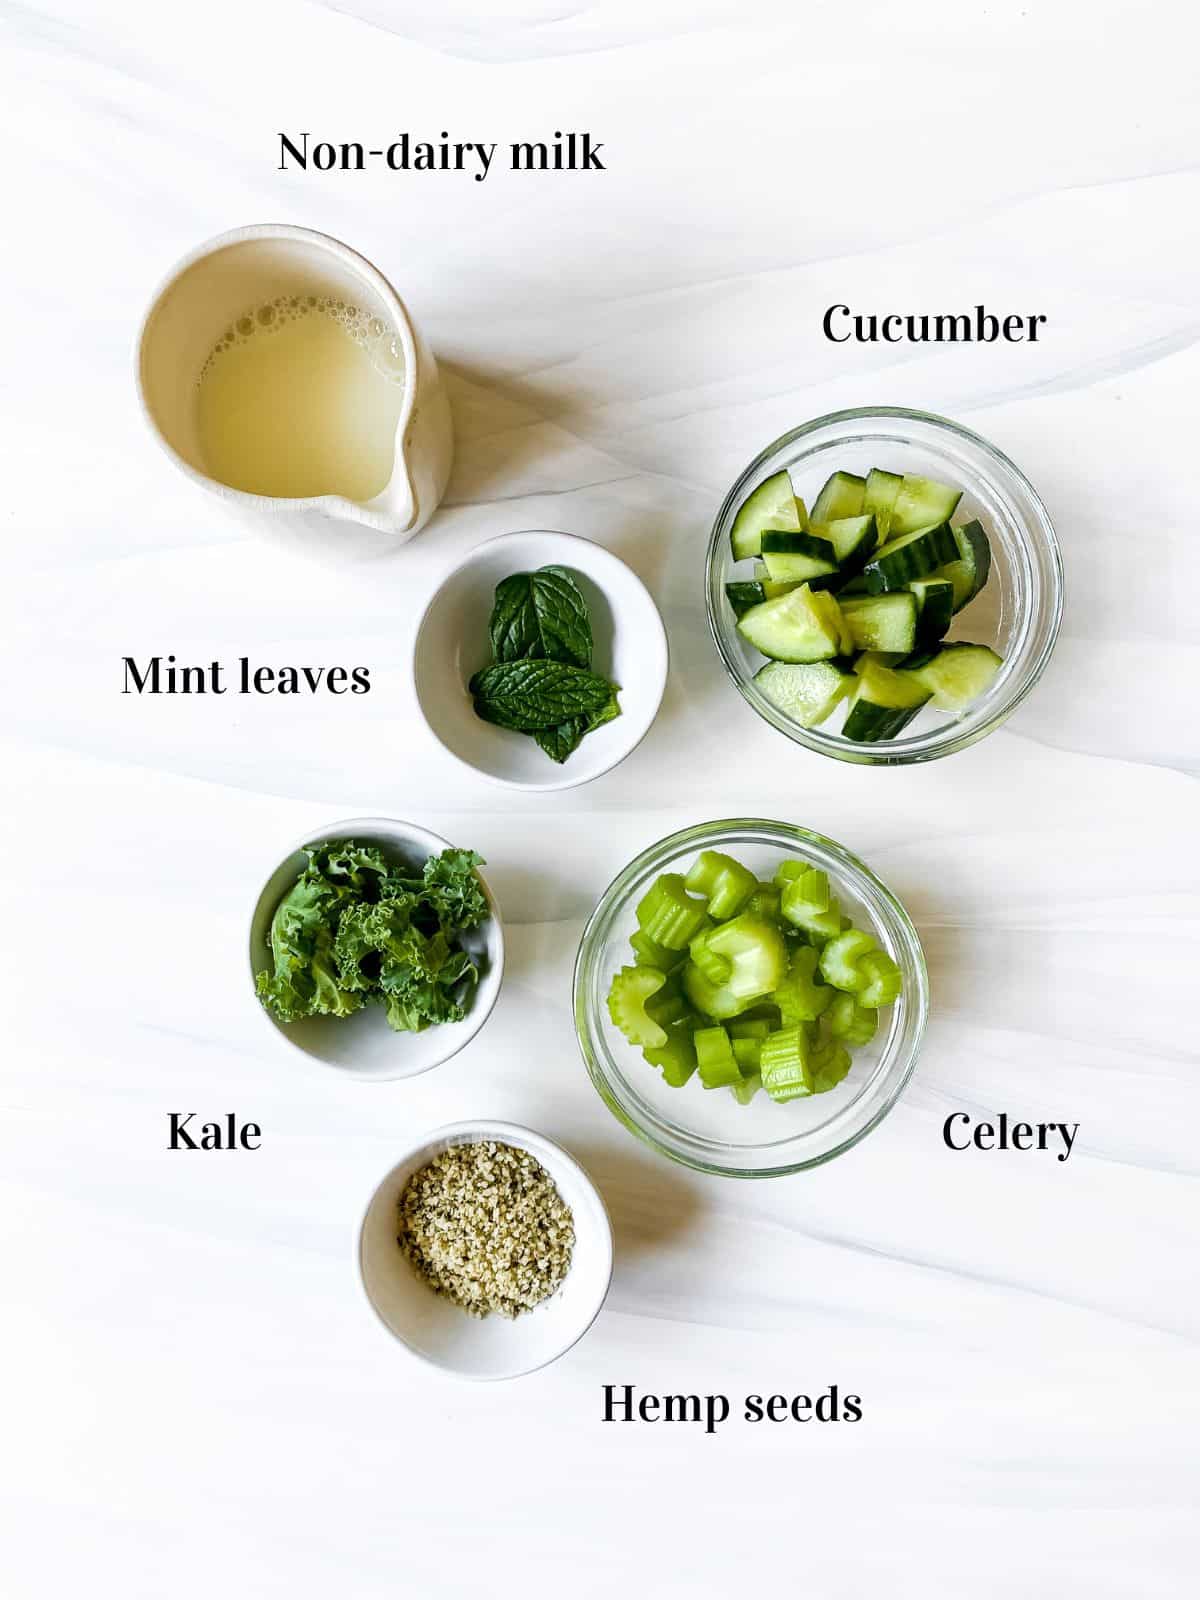 labelled ingredients to make celery cucumber smoothie in small bowls.